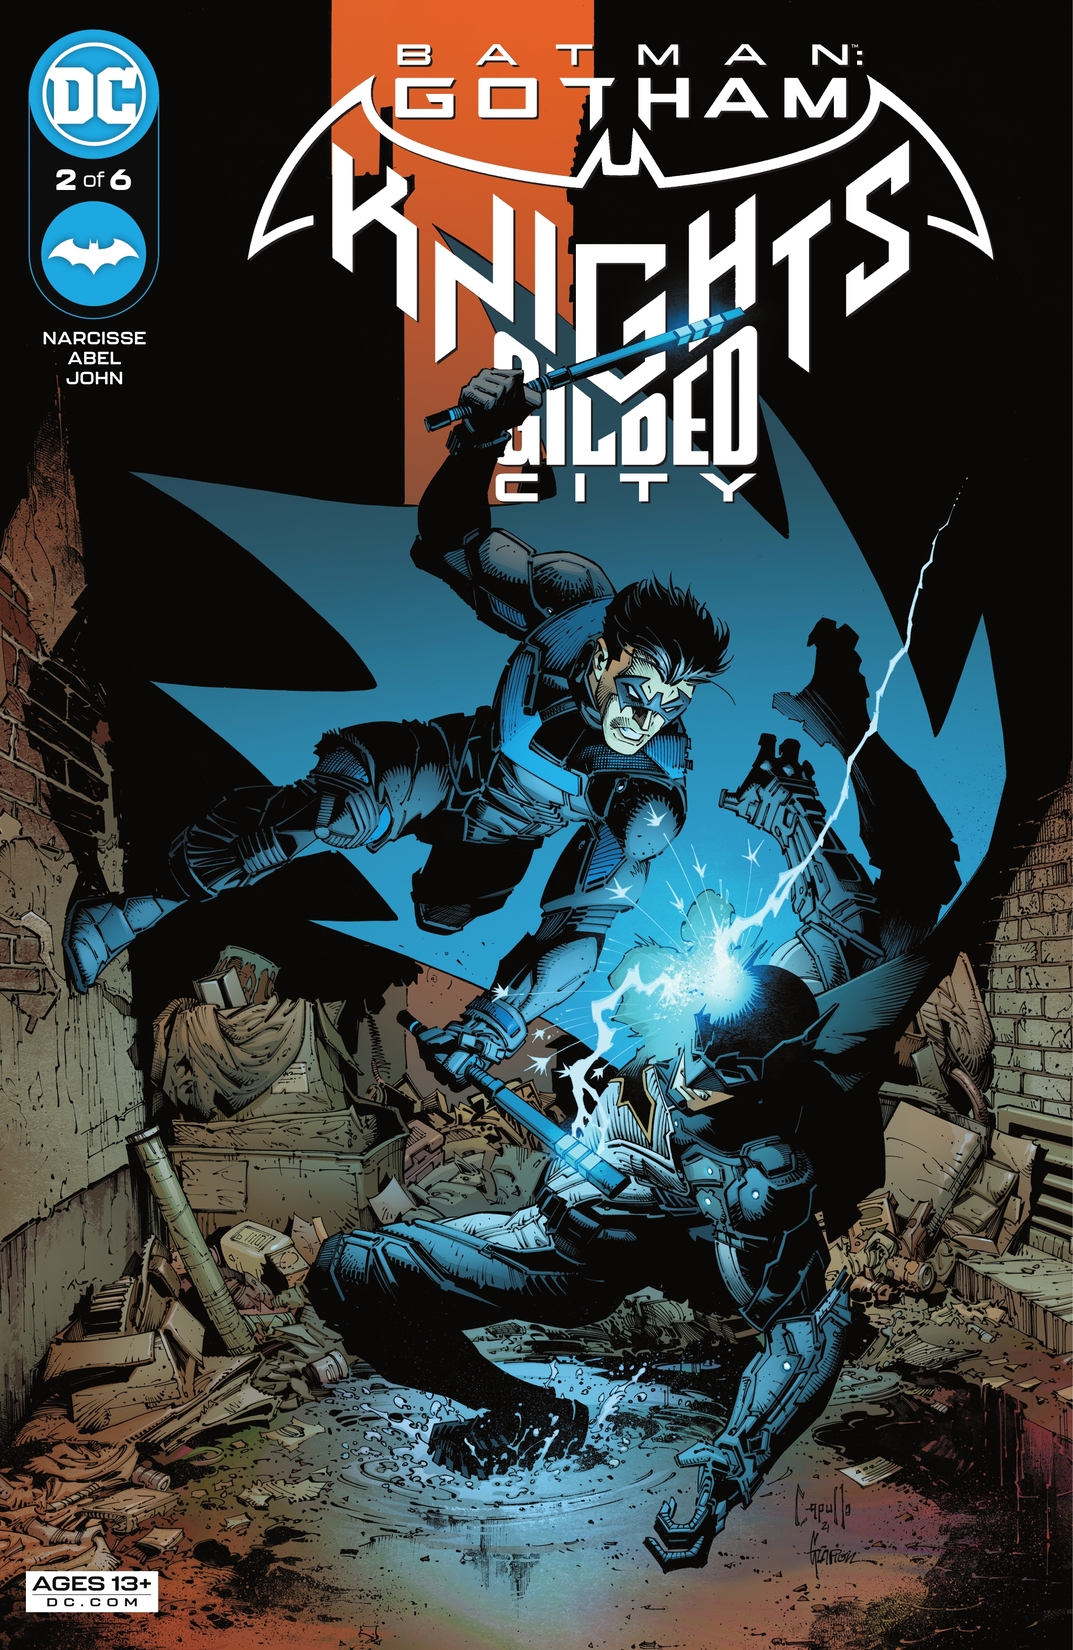 Batman: Gotham Knights – Gilded City #2 preview images